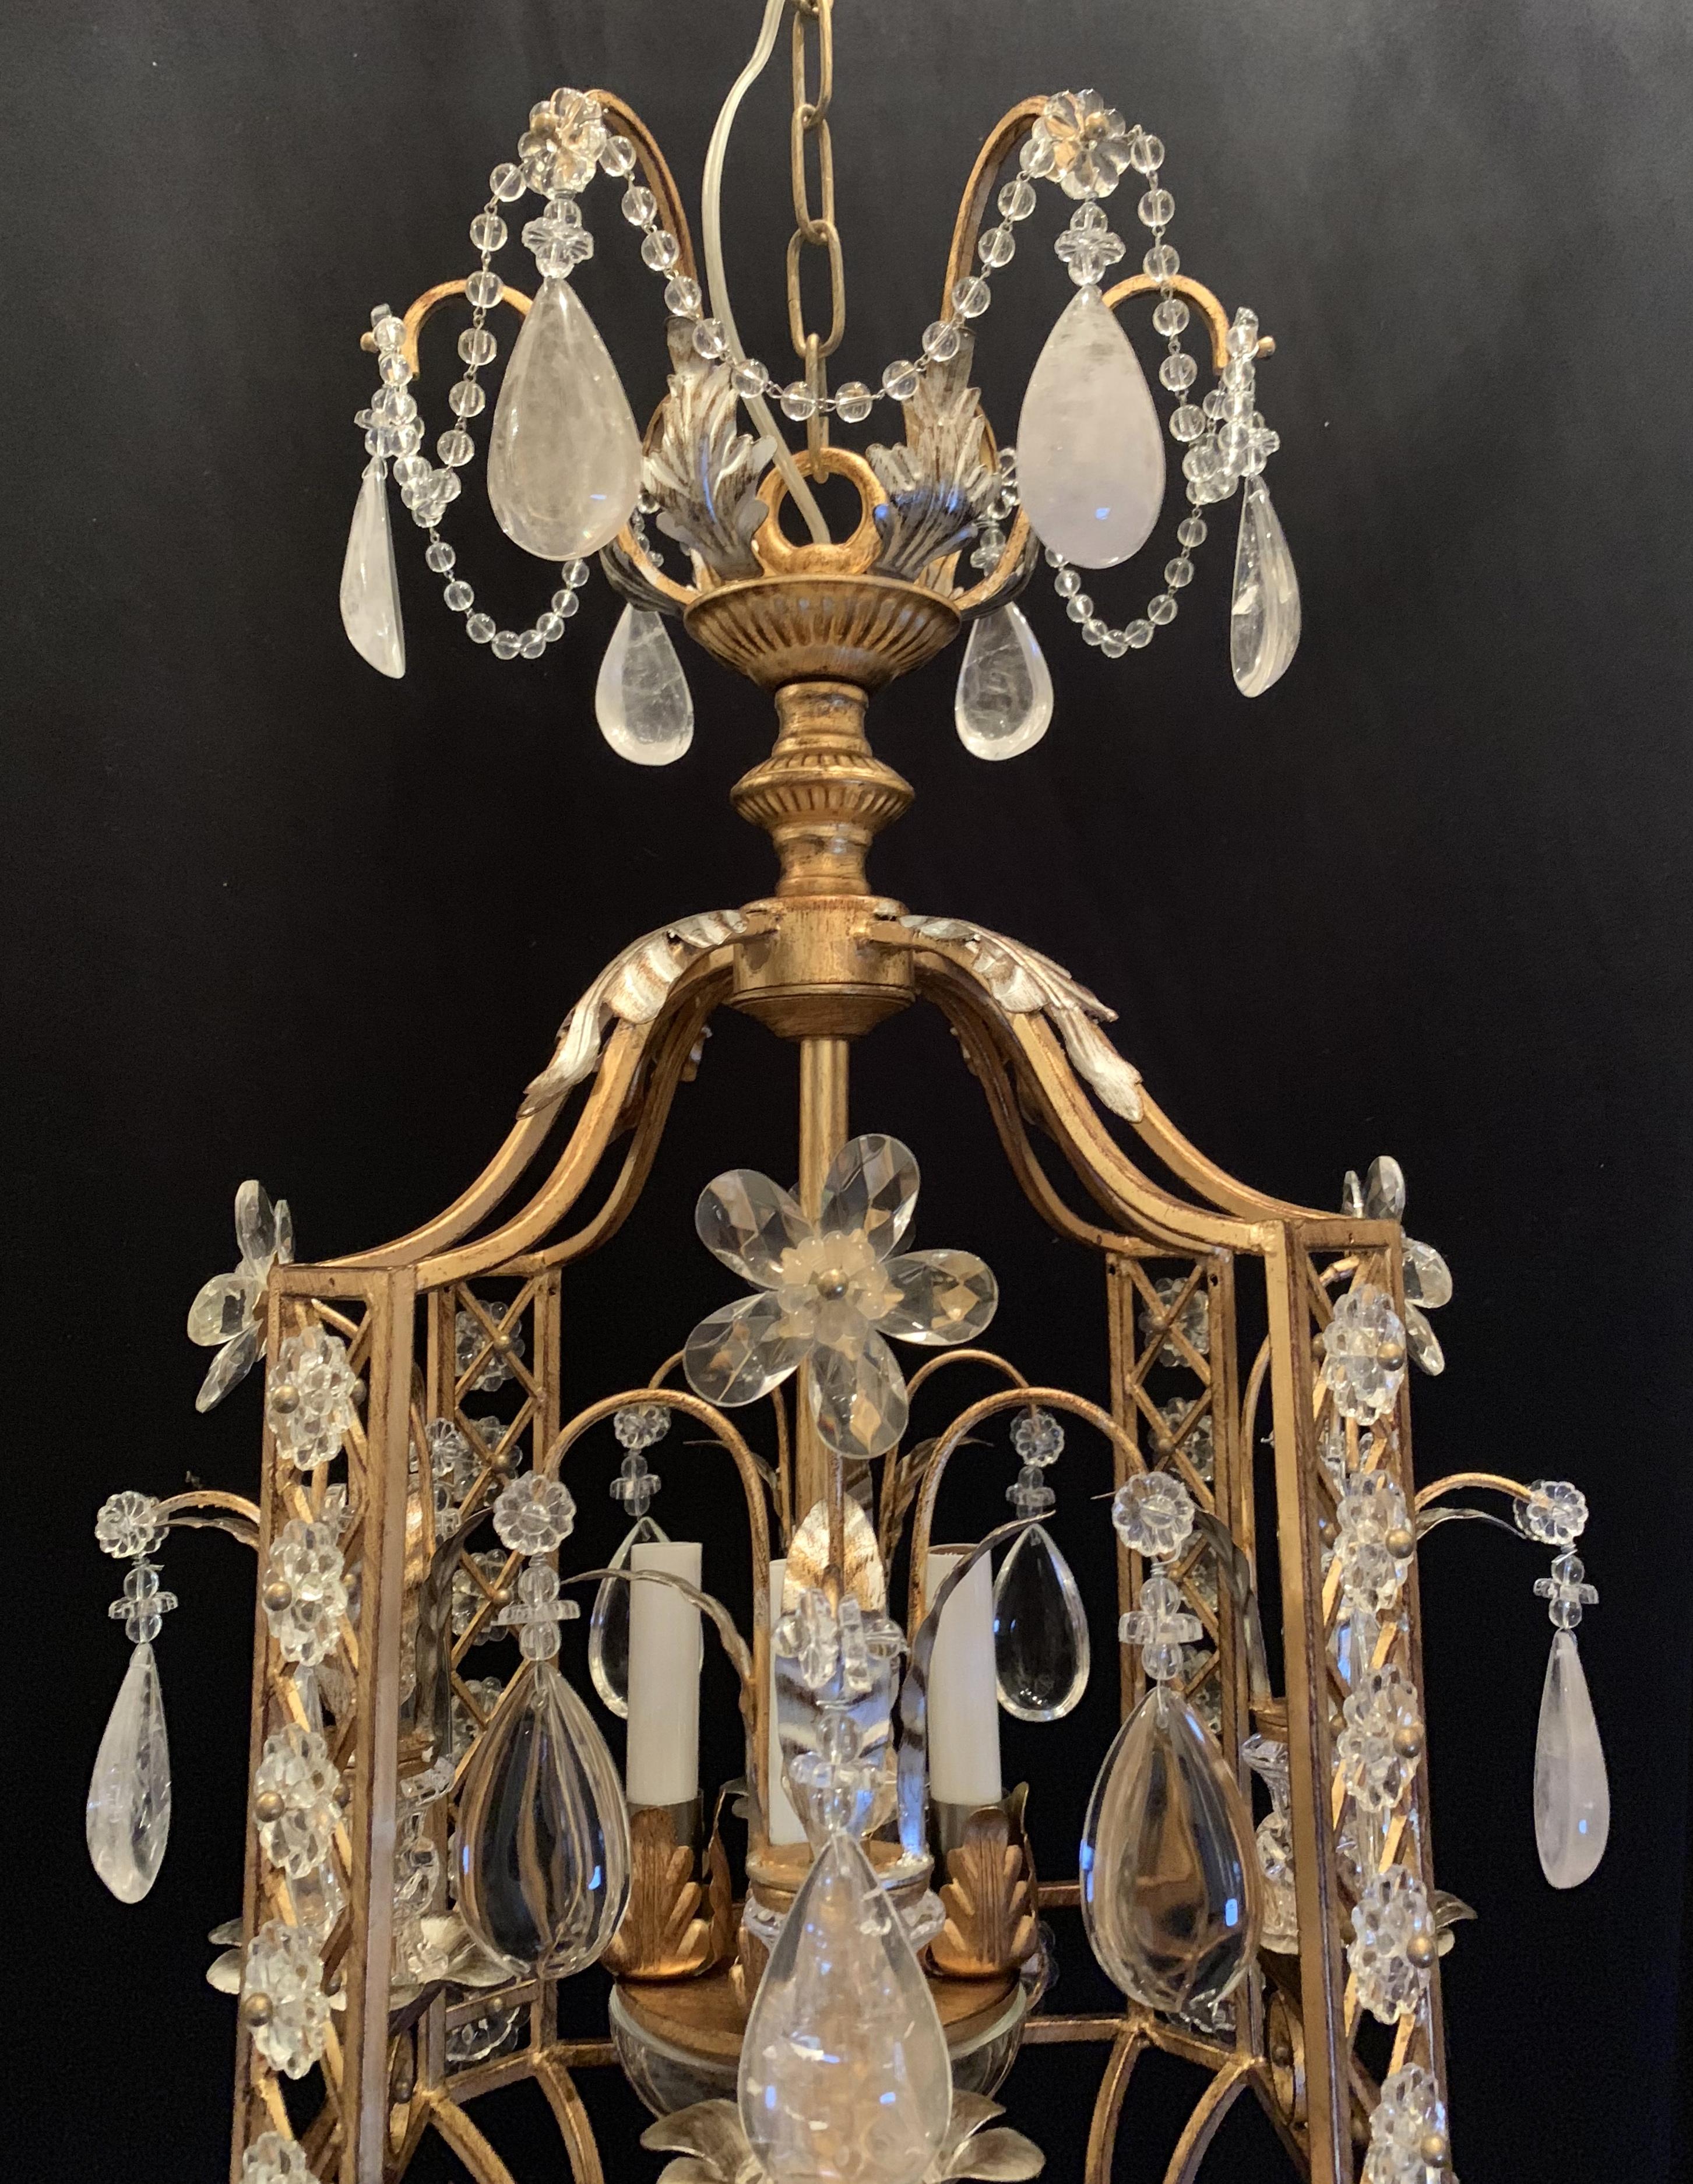 A fine Mid-Century Modern french baguès style rock crystal 4 candelabra light lantern pagoda form silver and gold gilt mix set of 3 chandeliers with beaded swags.
Each sold separately.